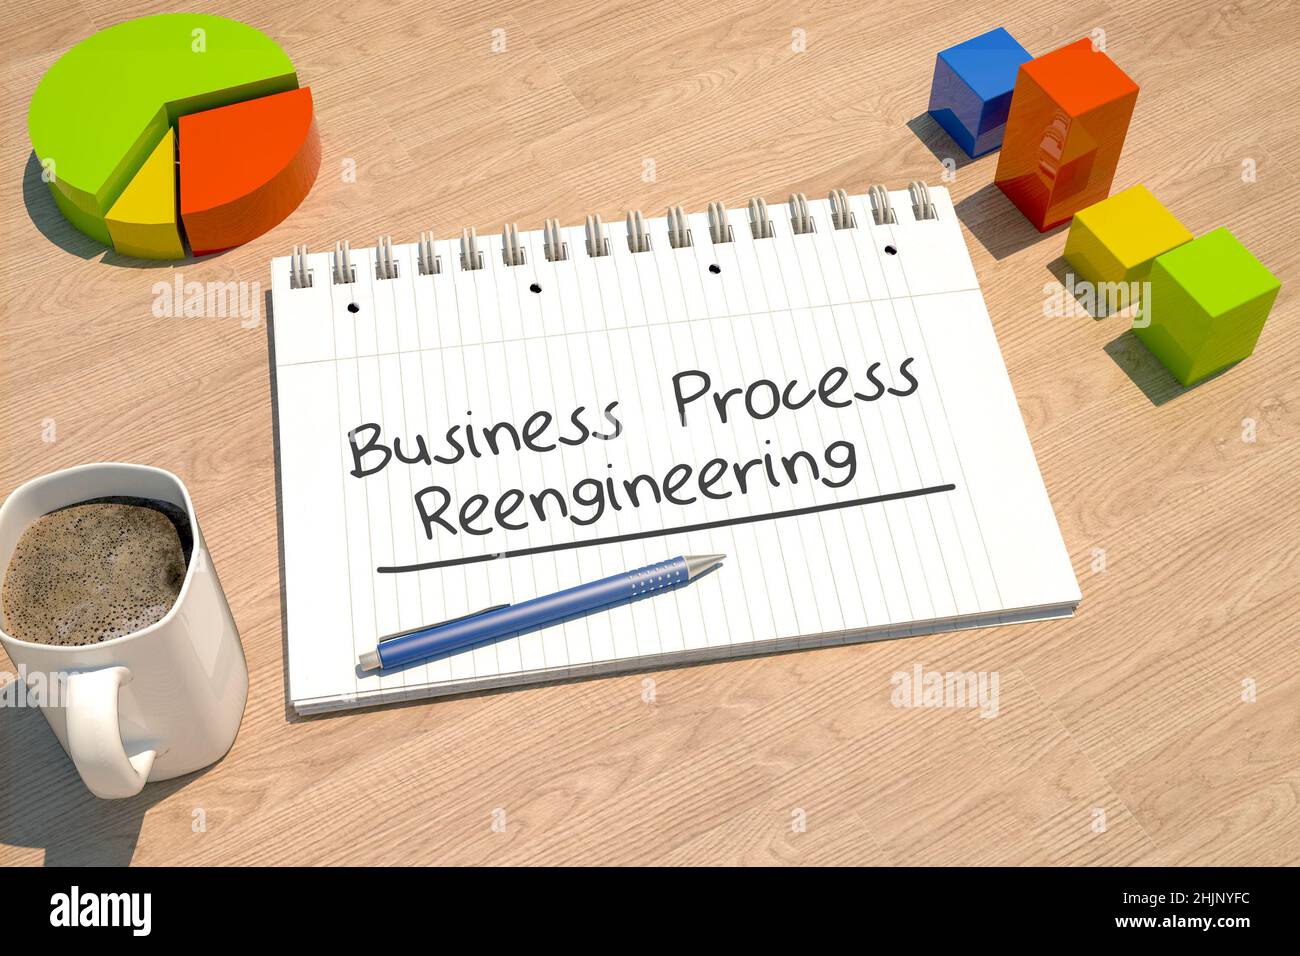 Business Process Reengineering - text concept with notebook, coffee mug, bar graph and pie chart on wooden background - 3d render illustration. Stock Photo